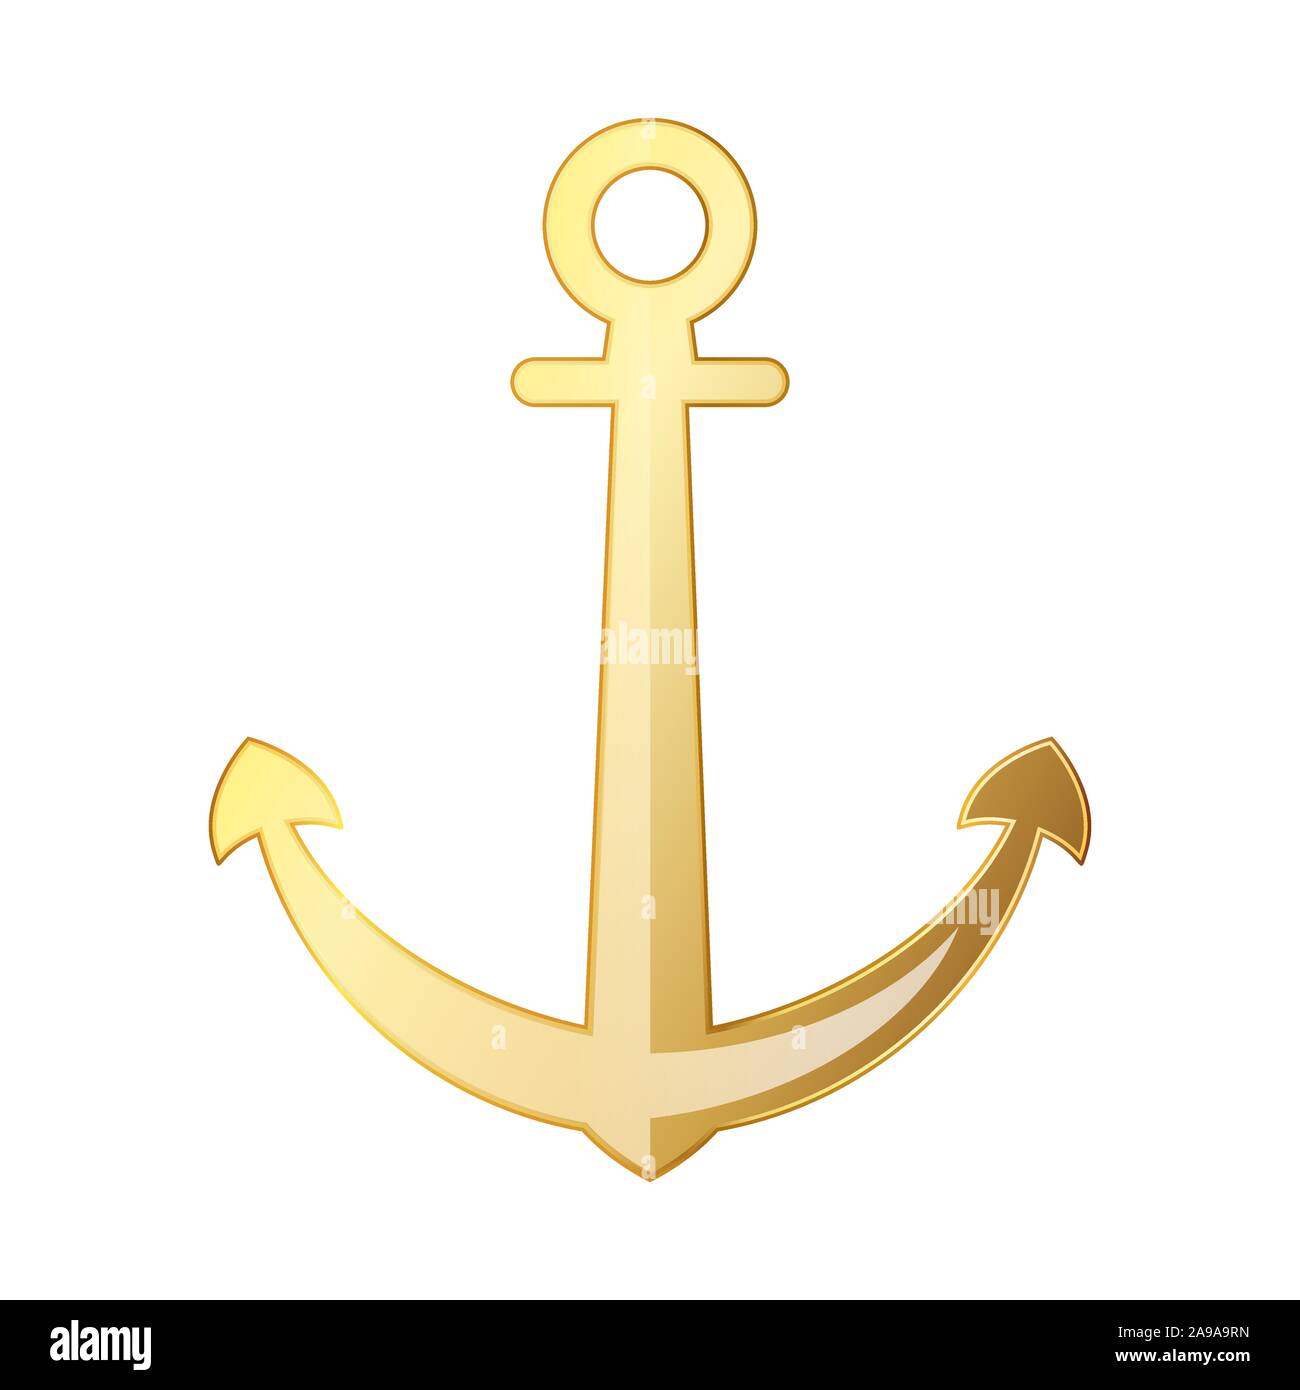 Golden anchor icon, isolated on white background. Vector